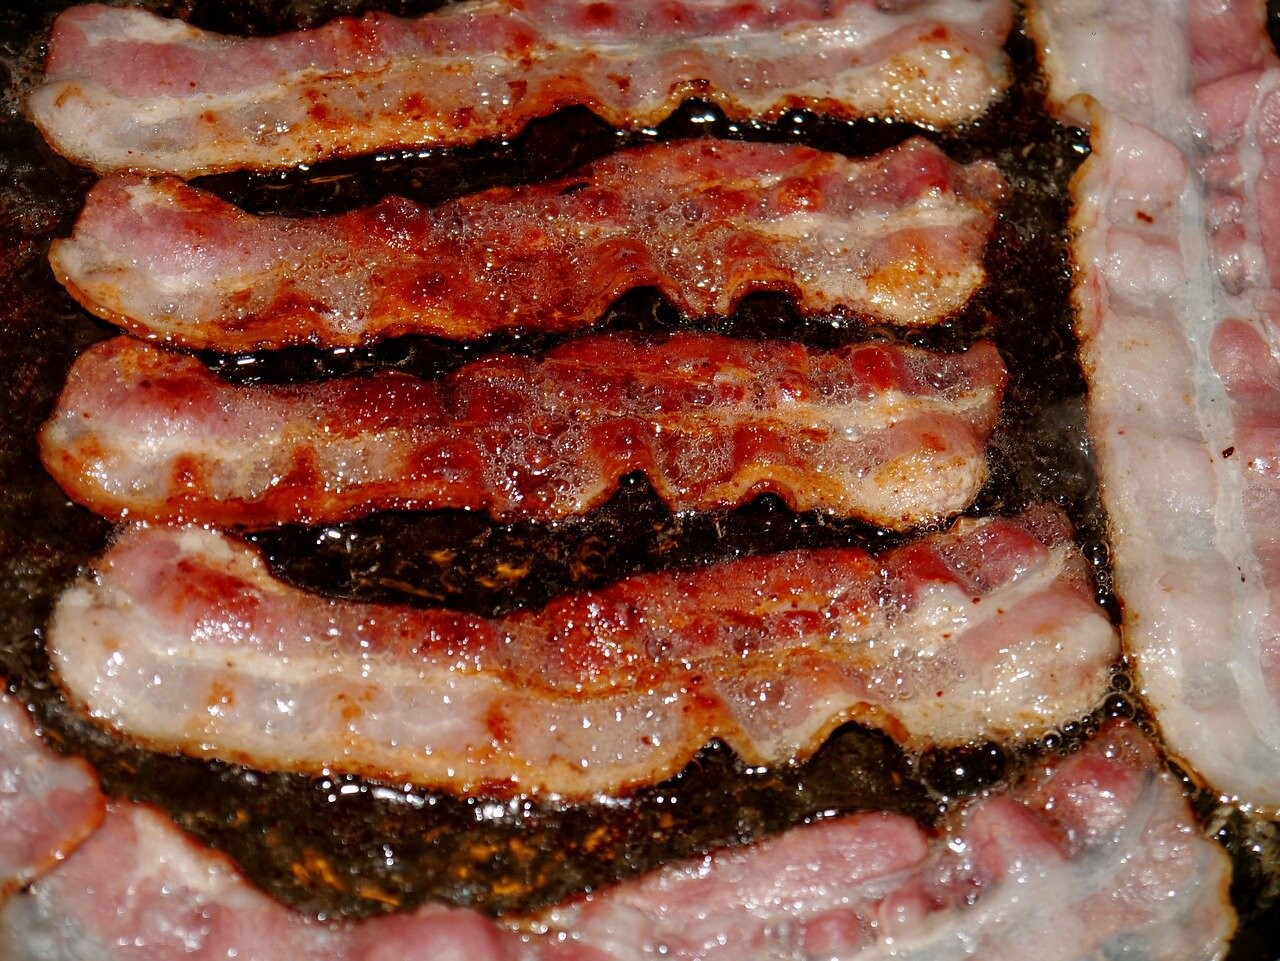 Bacon and Food Safety - StoryMD